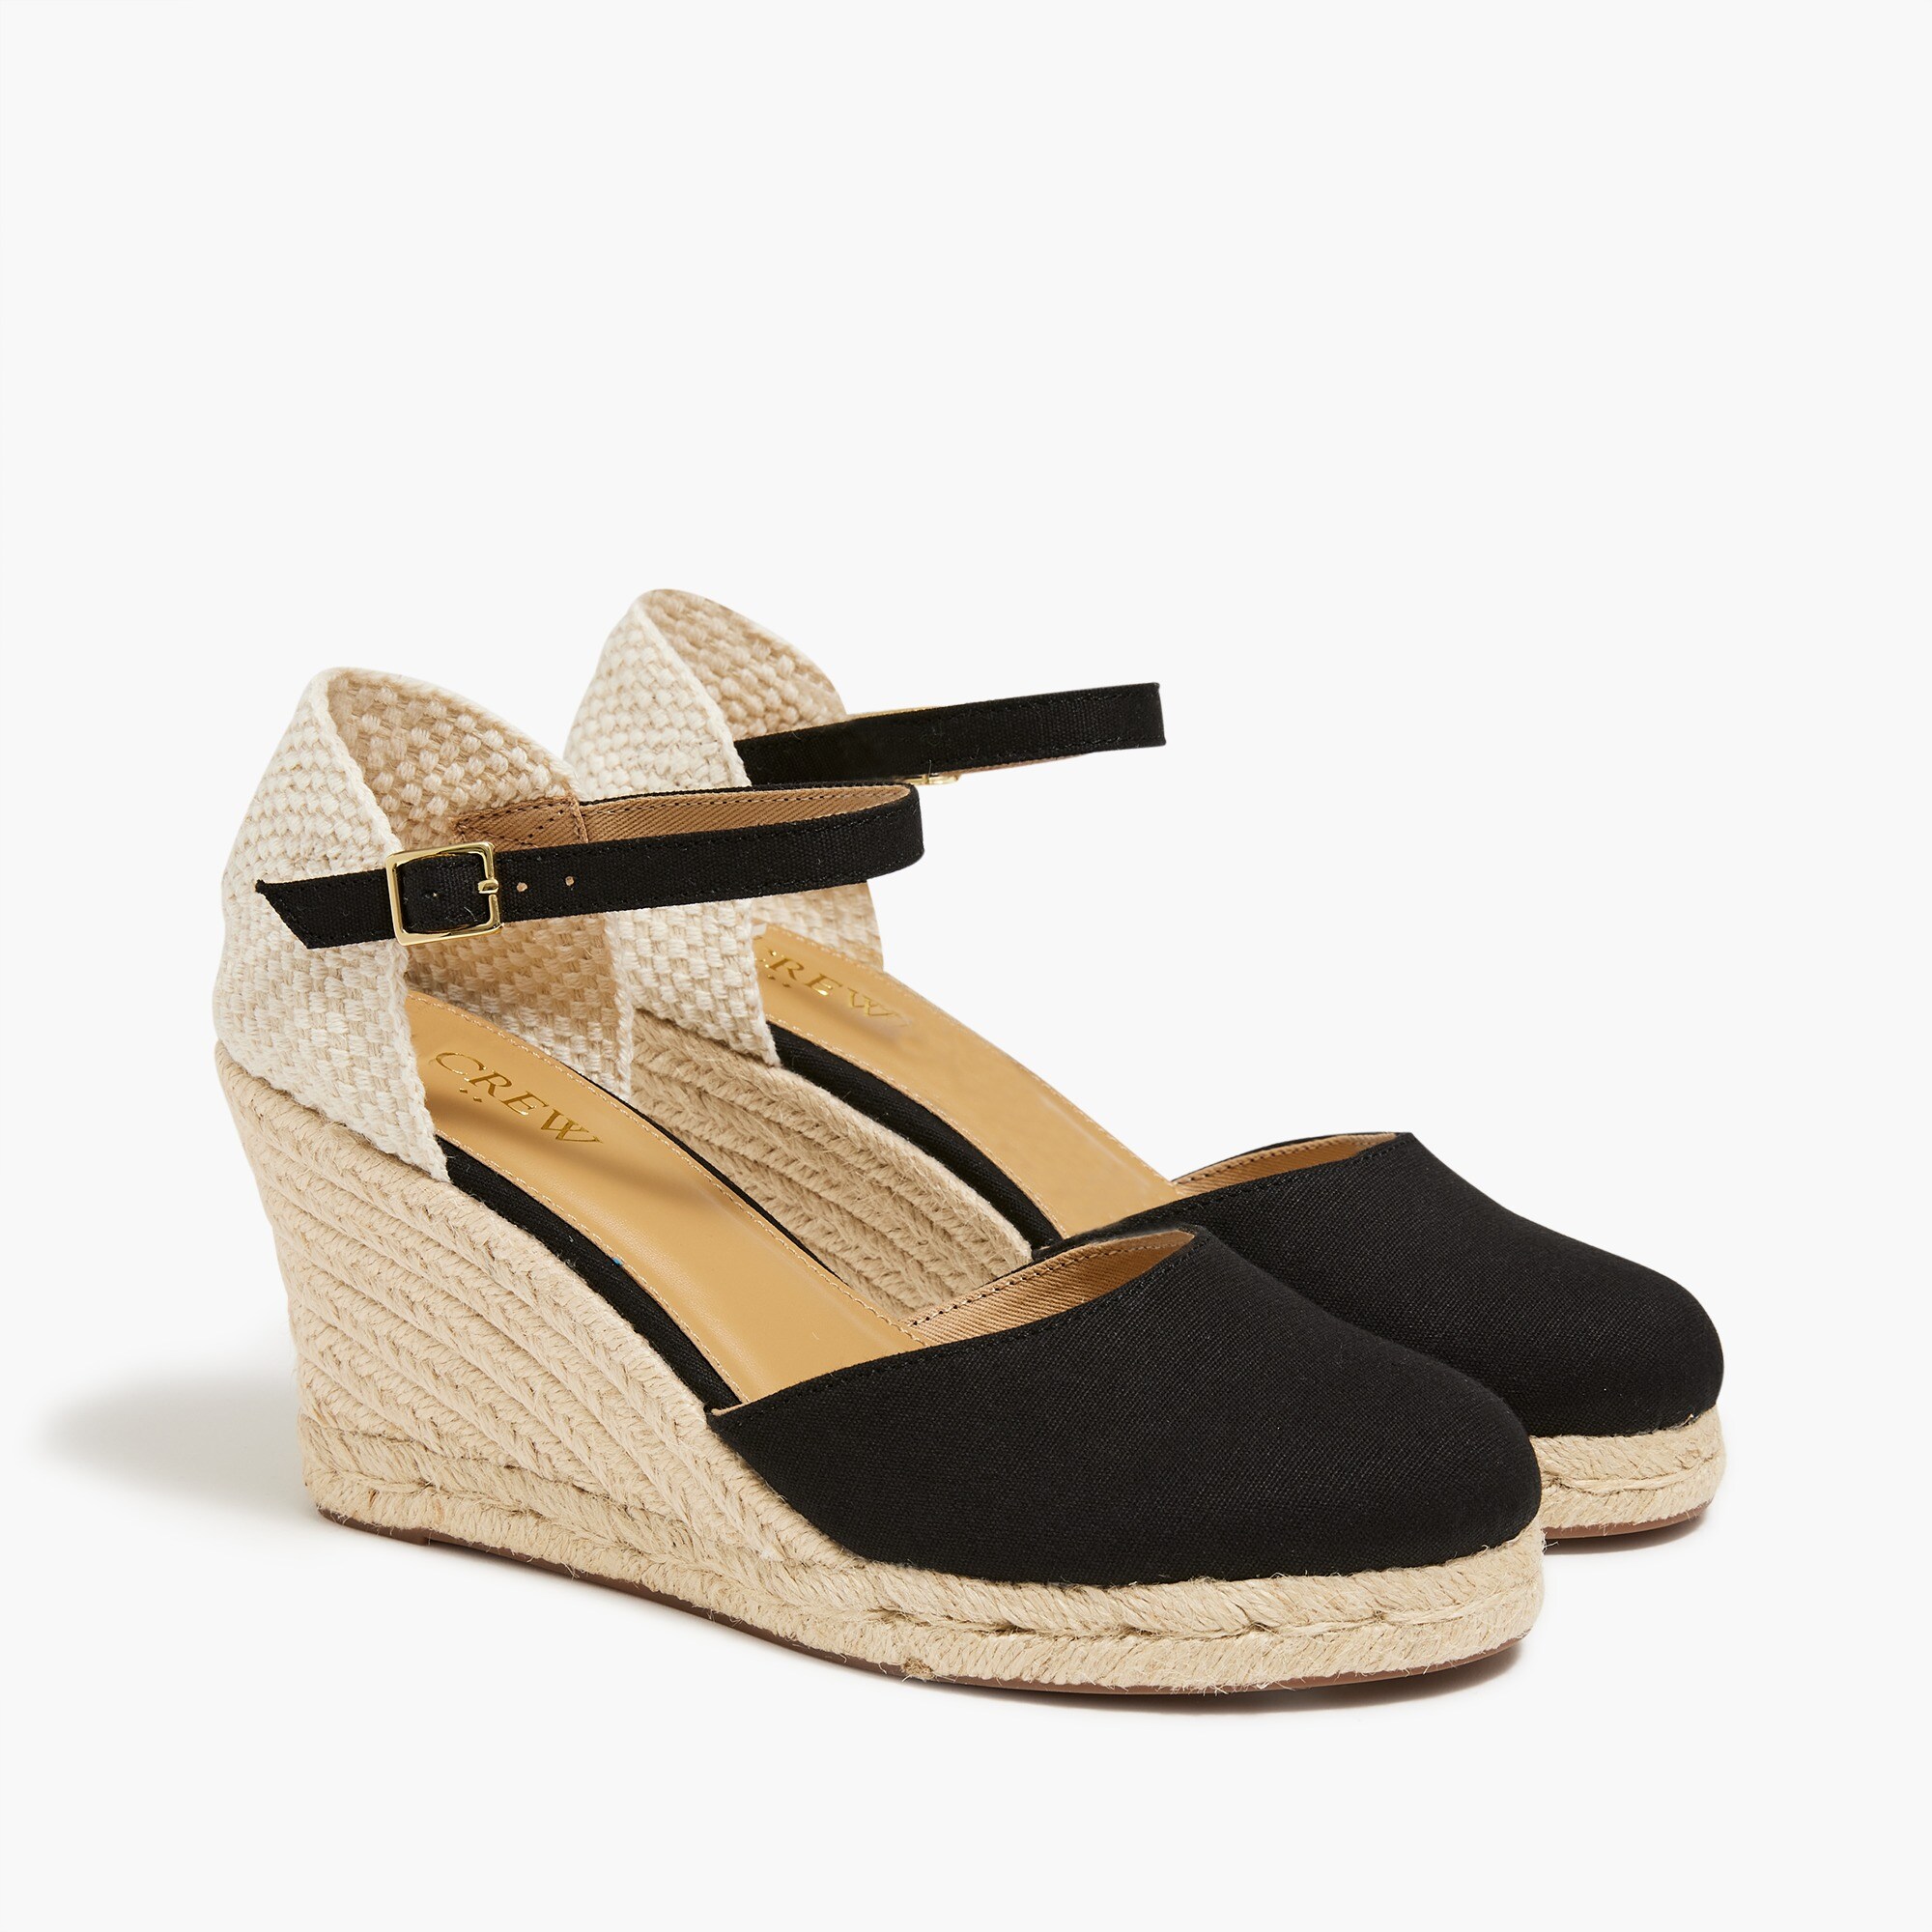 womens Ankle-strap espadrille wedges